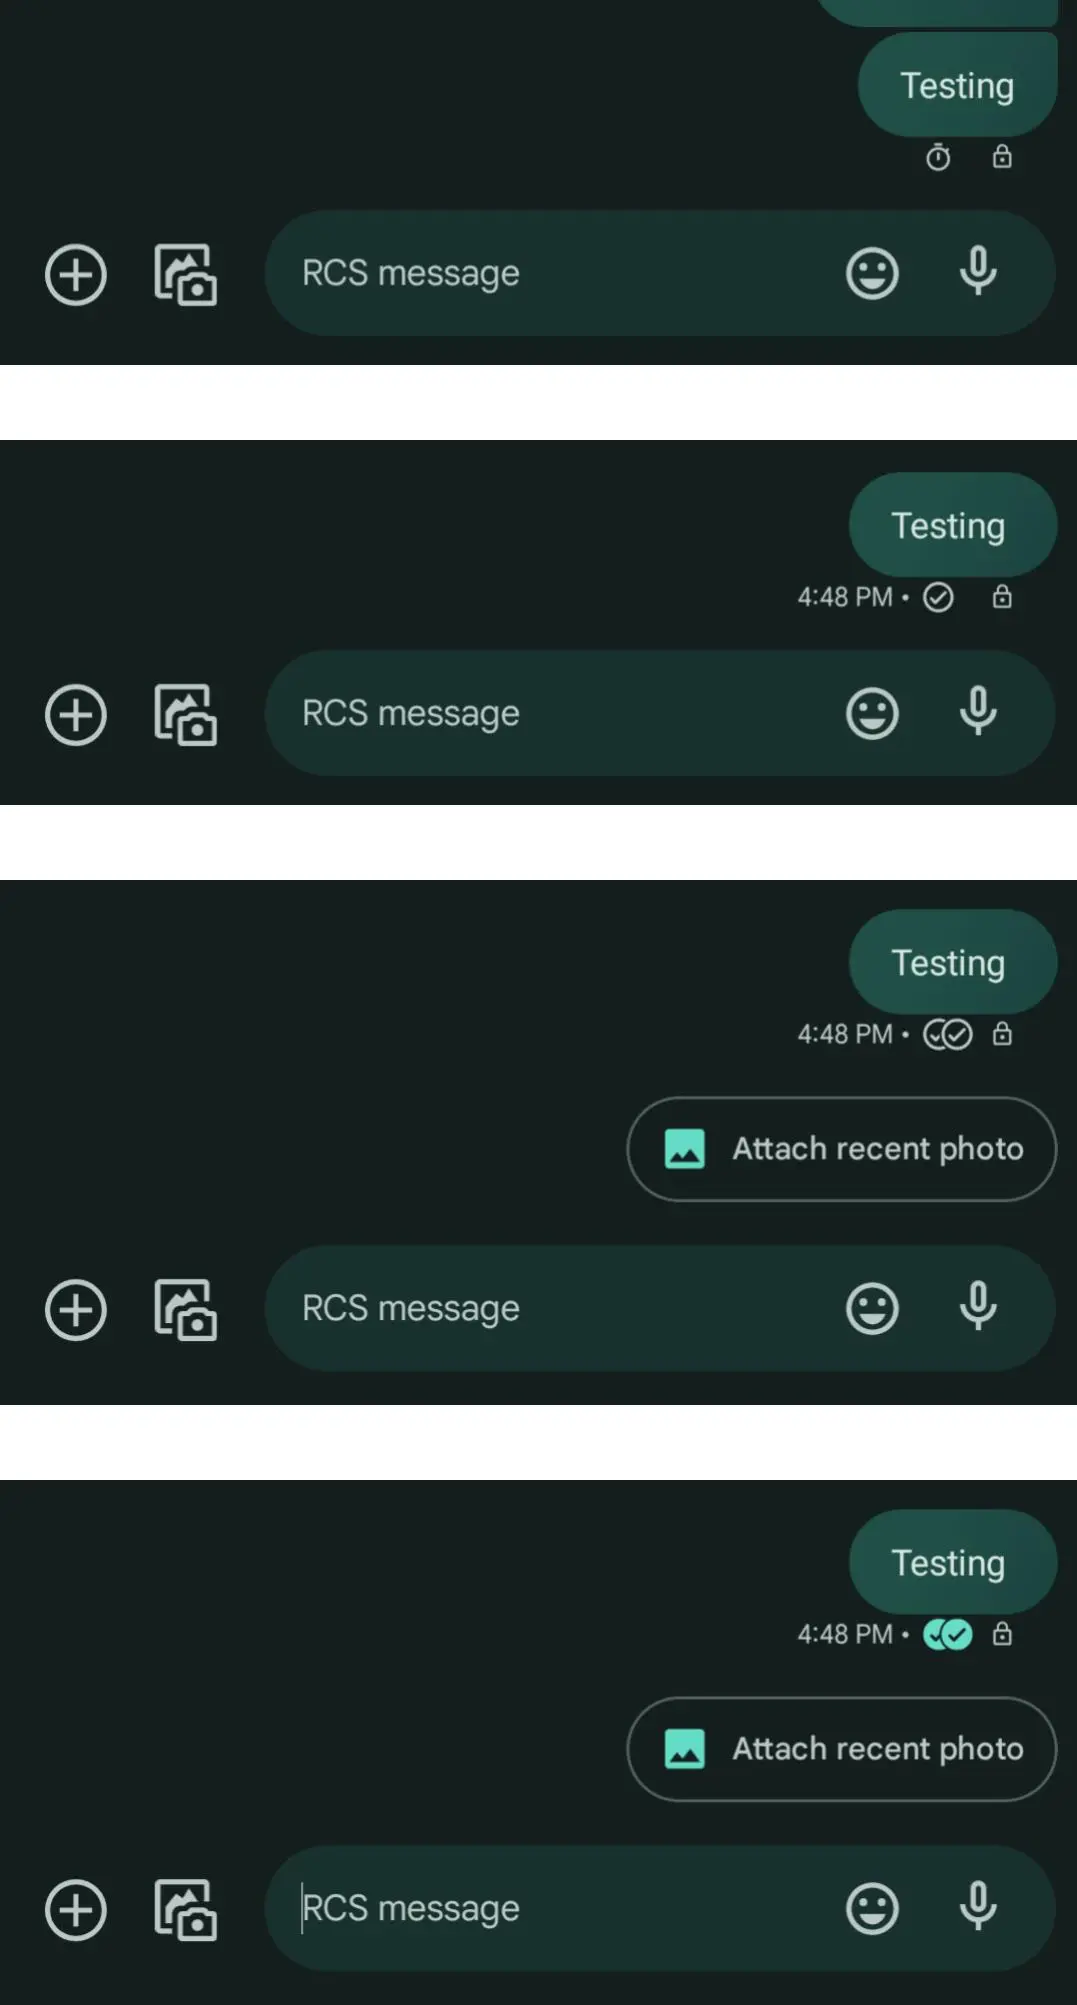 Android Text Messages: What Do The Single & Double Check Marks Mean?